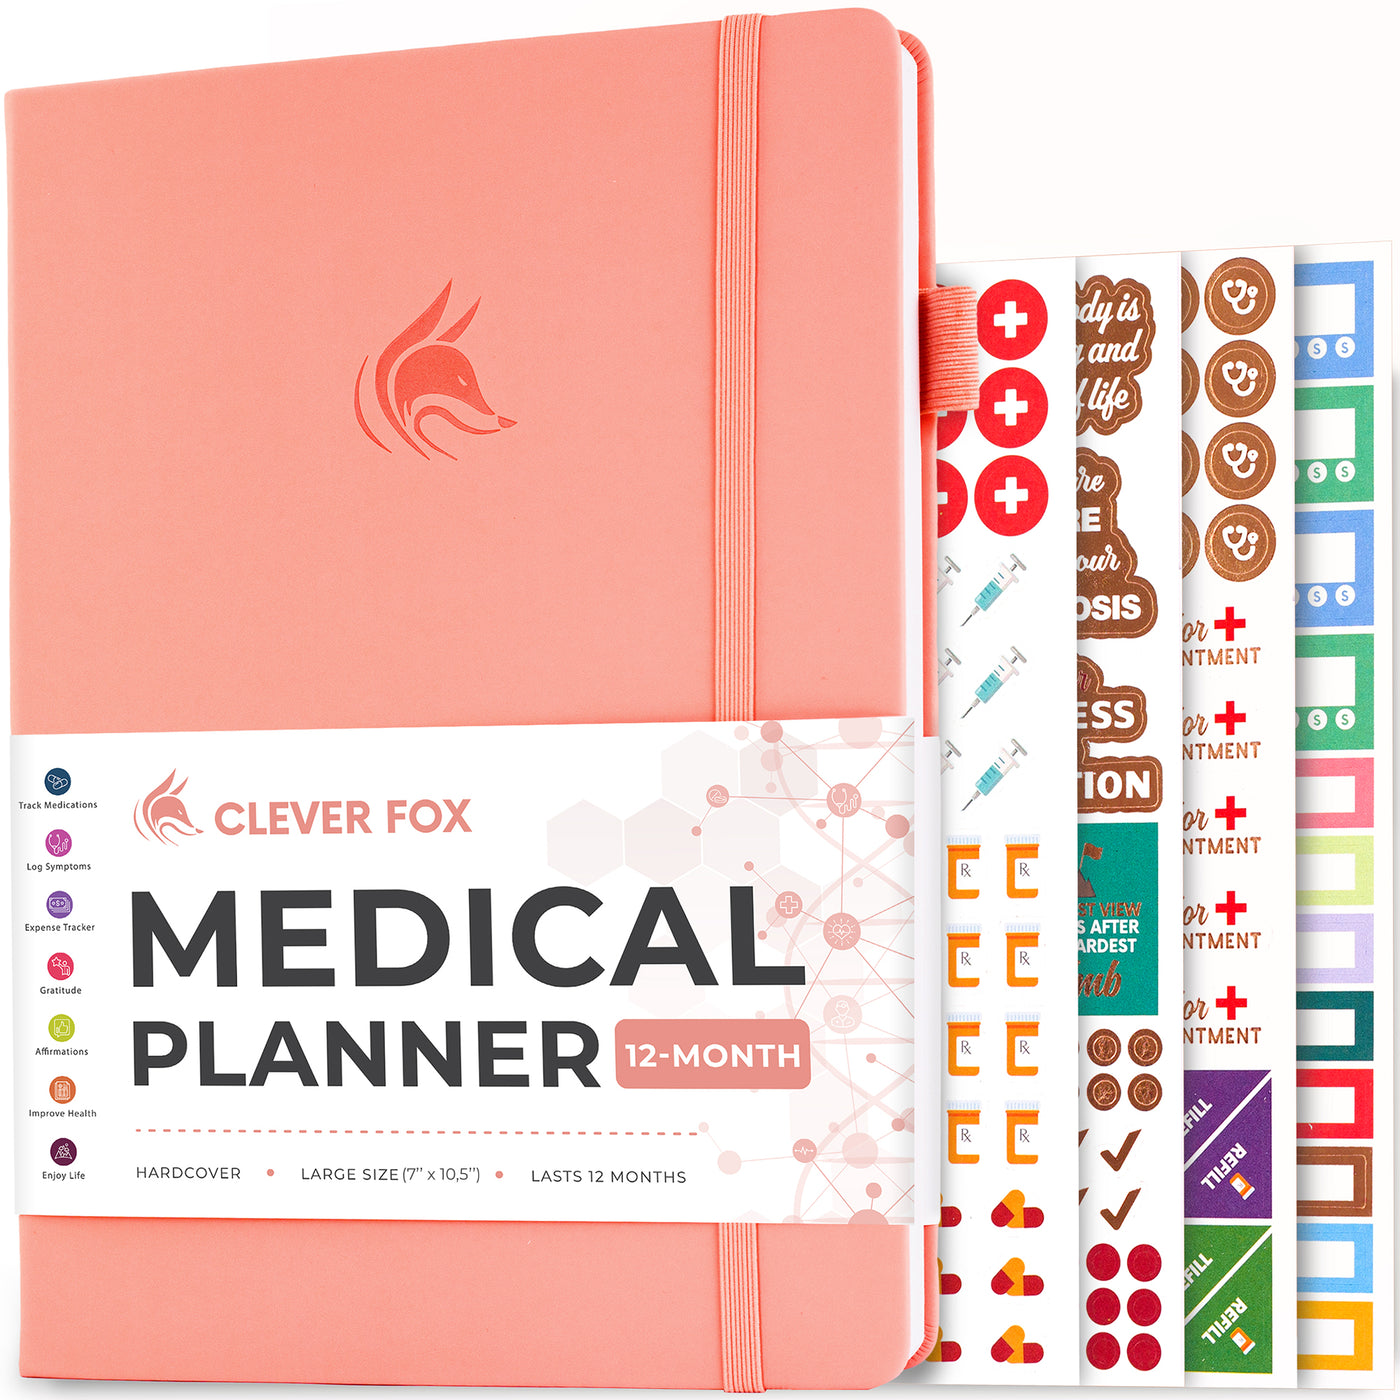 Medical Planner 12-Month - Take Full Control of Your Health & Wellbeing